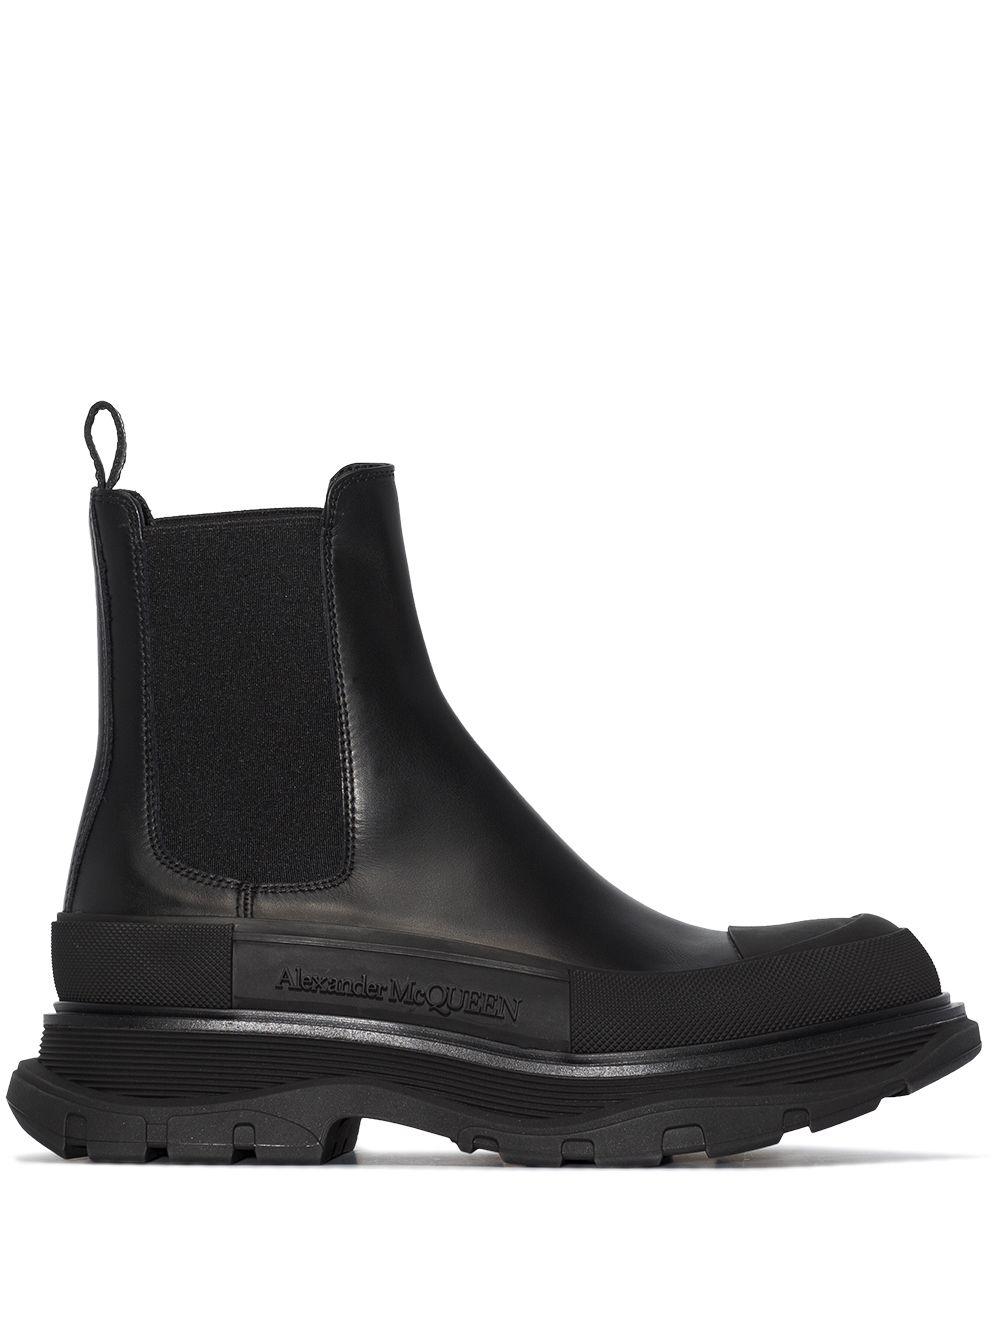 Alexander McQueen Leather Chunky-sole Chelsea Boots in Black - Lyst